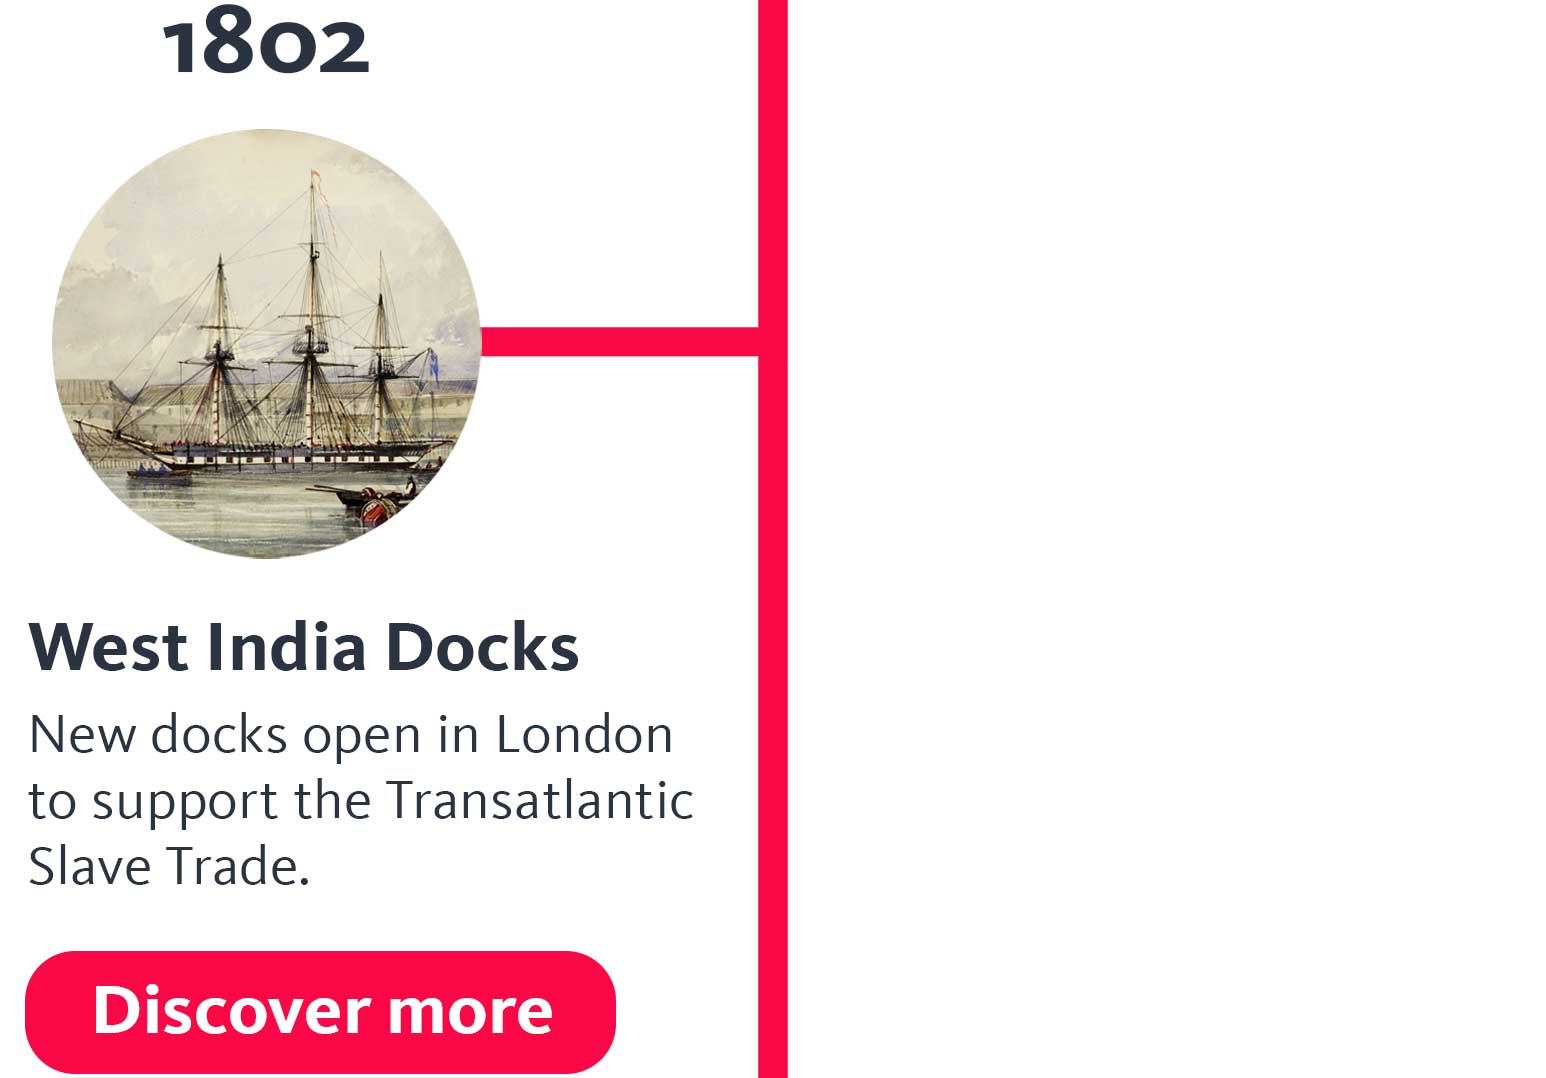 The year '1802' appears above an image of a sailing ship in a dock. A heading below says 'West India Docks', and text below that says 'New docks open in London to support the Transatlantic Slave Trade.' and below that, a button says 'Discover more'.